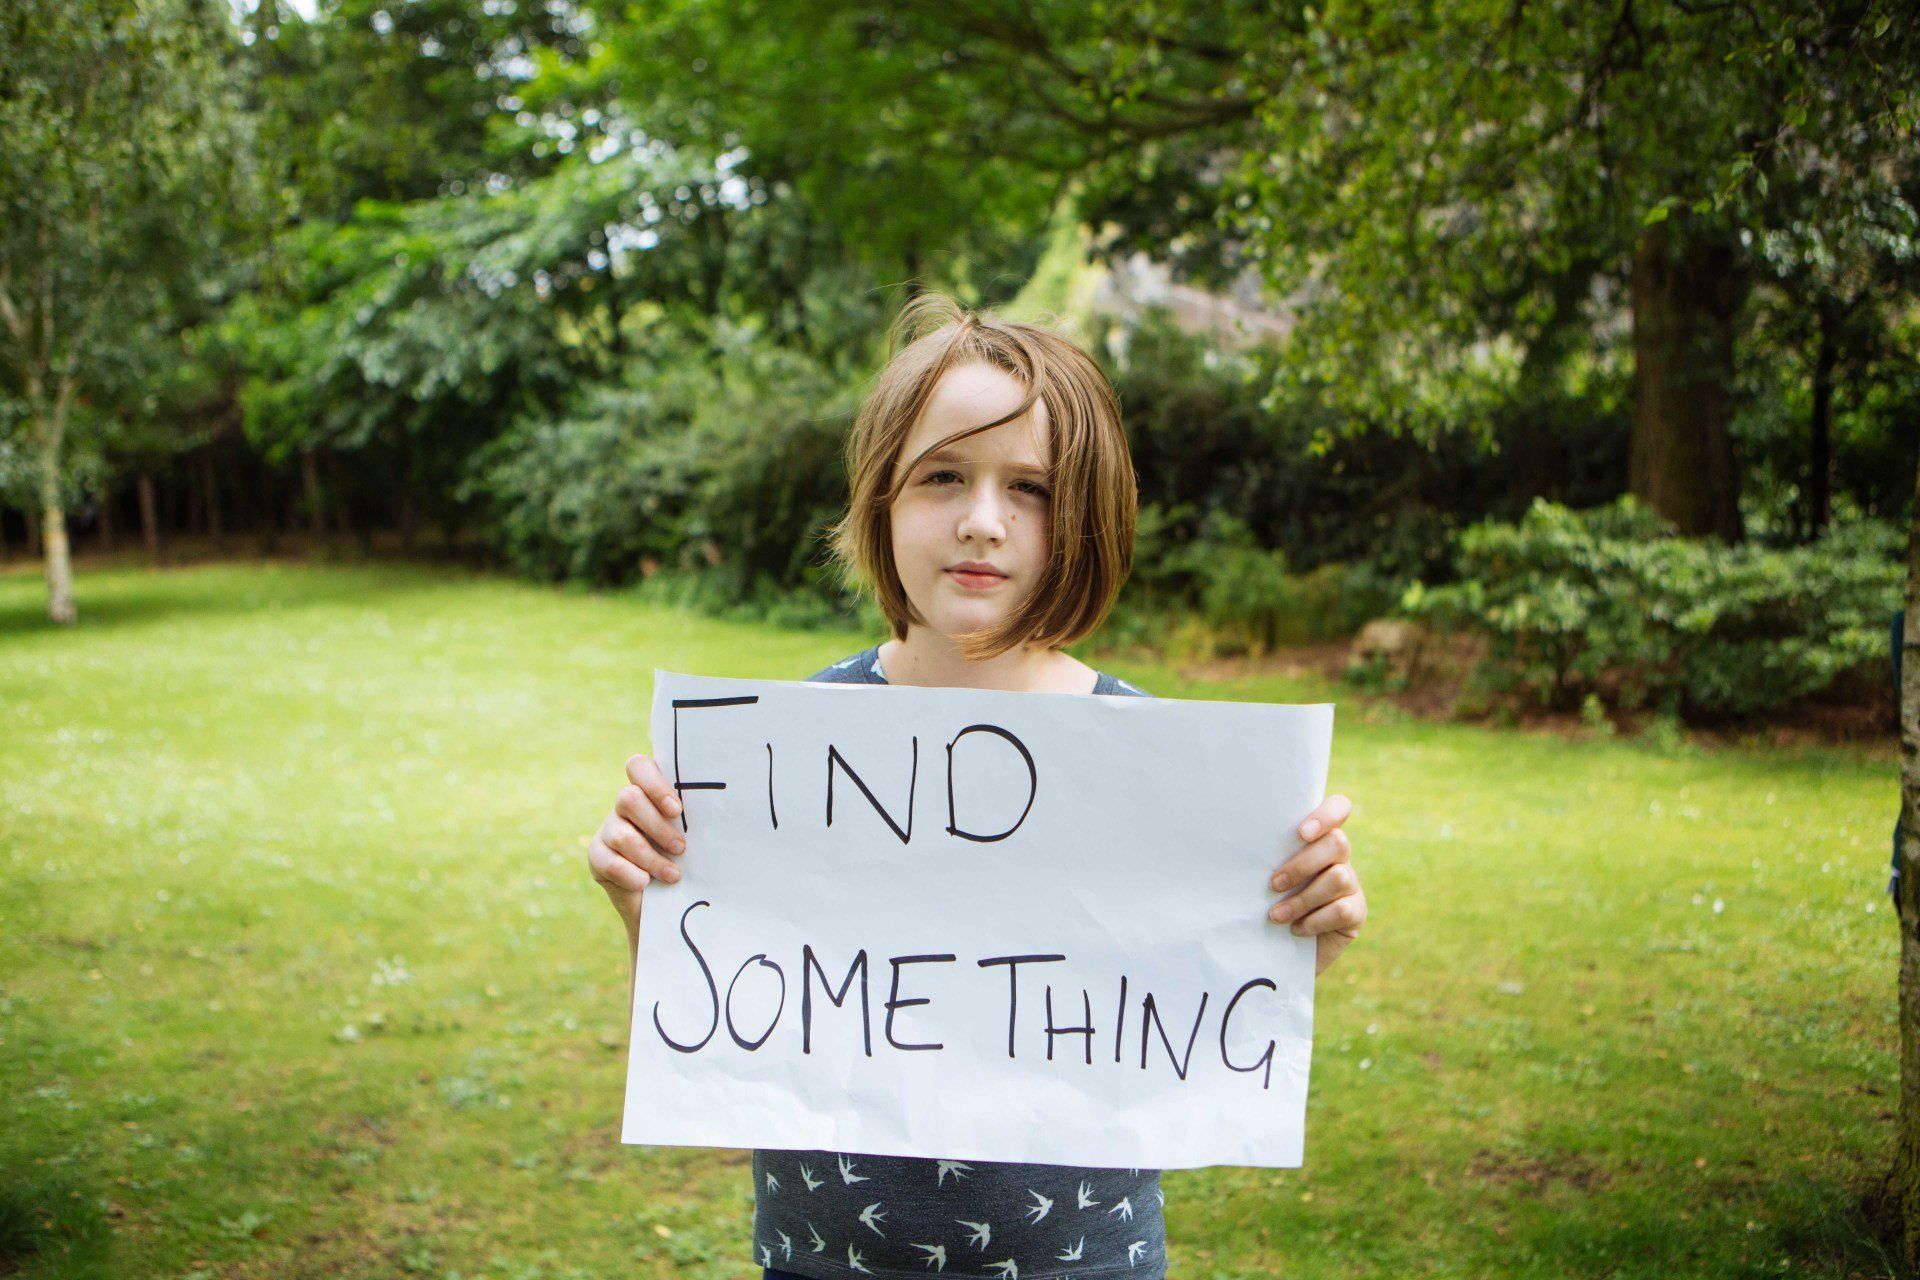 a young girl is holding a sign that says `` find something '' .